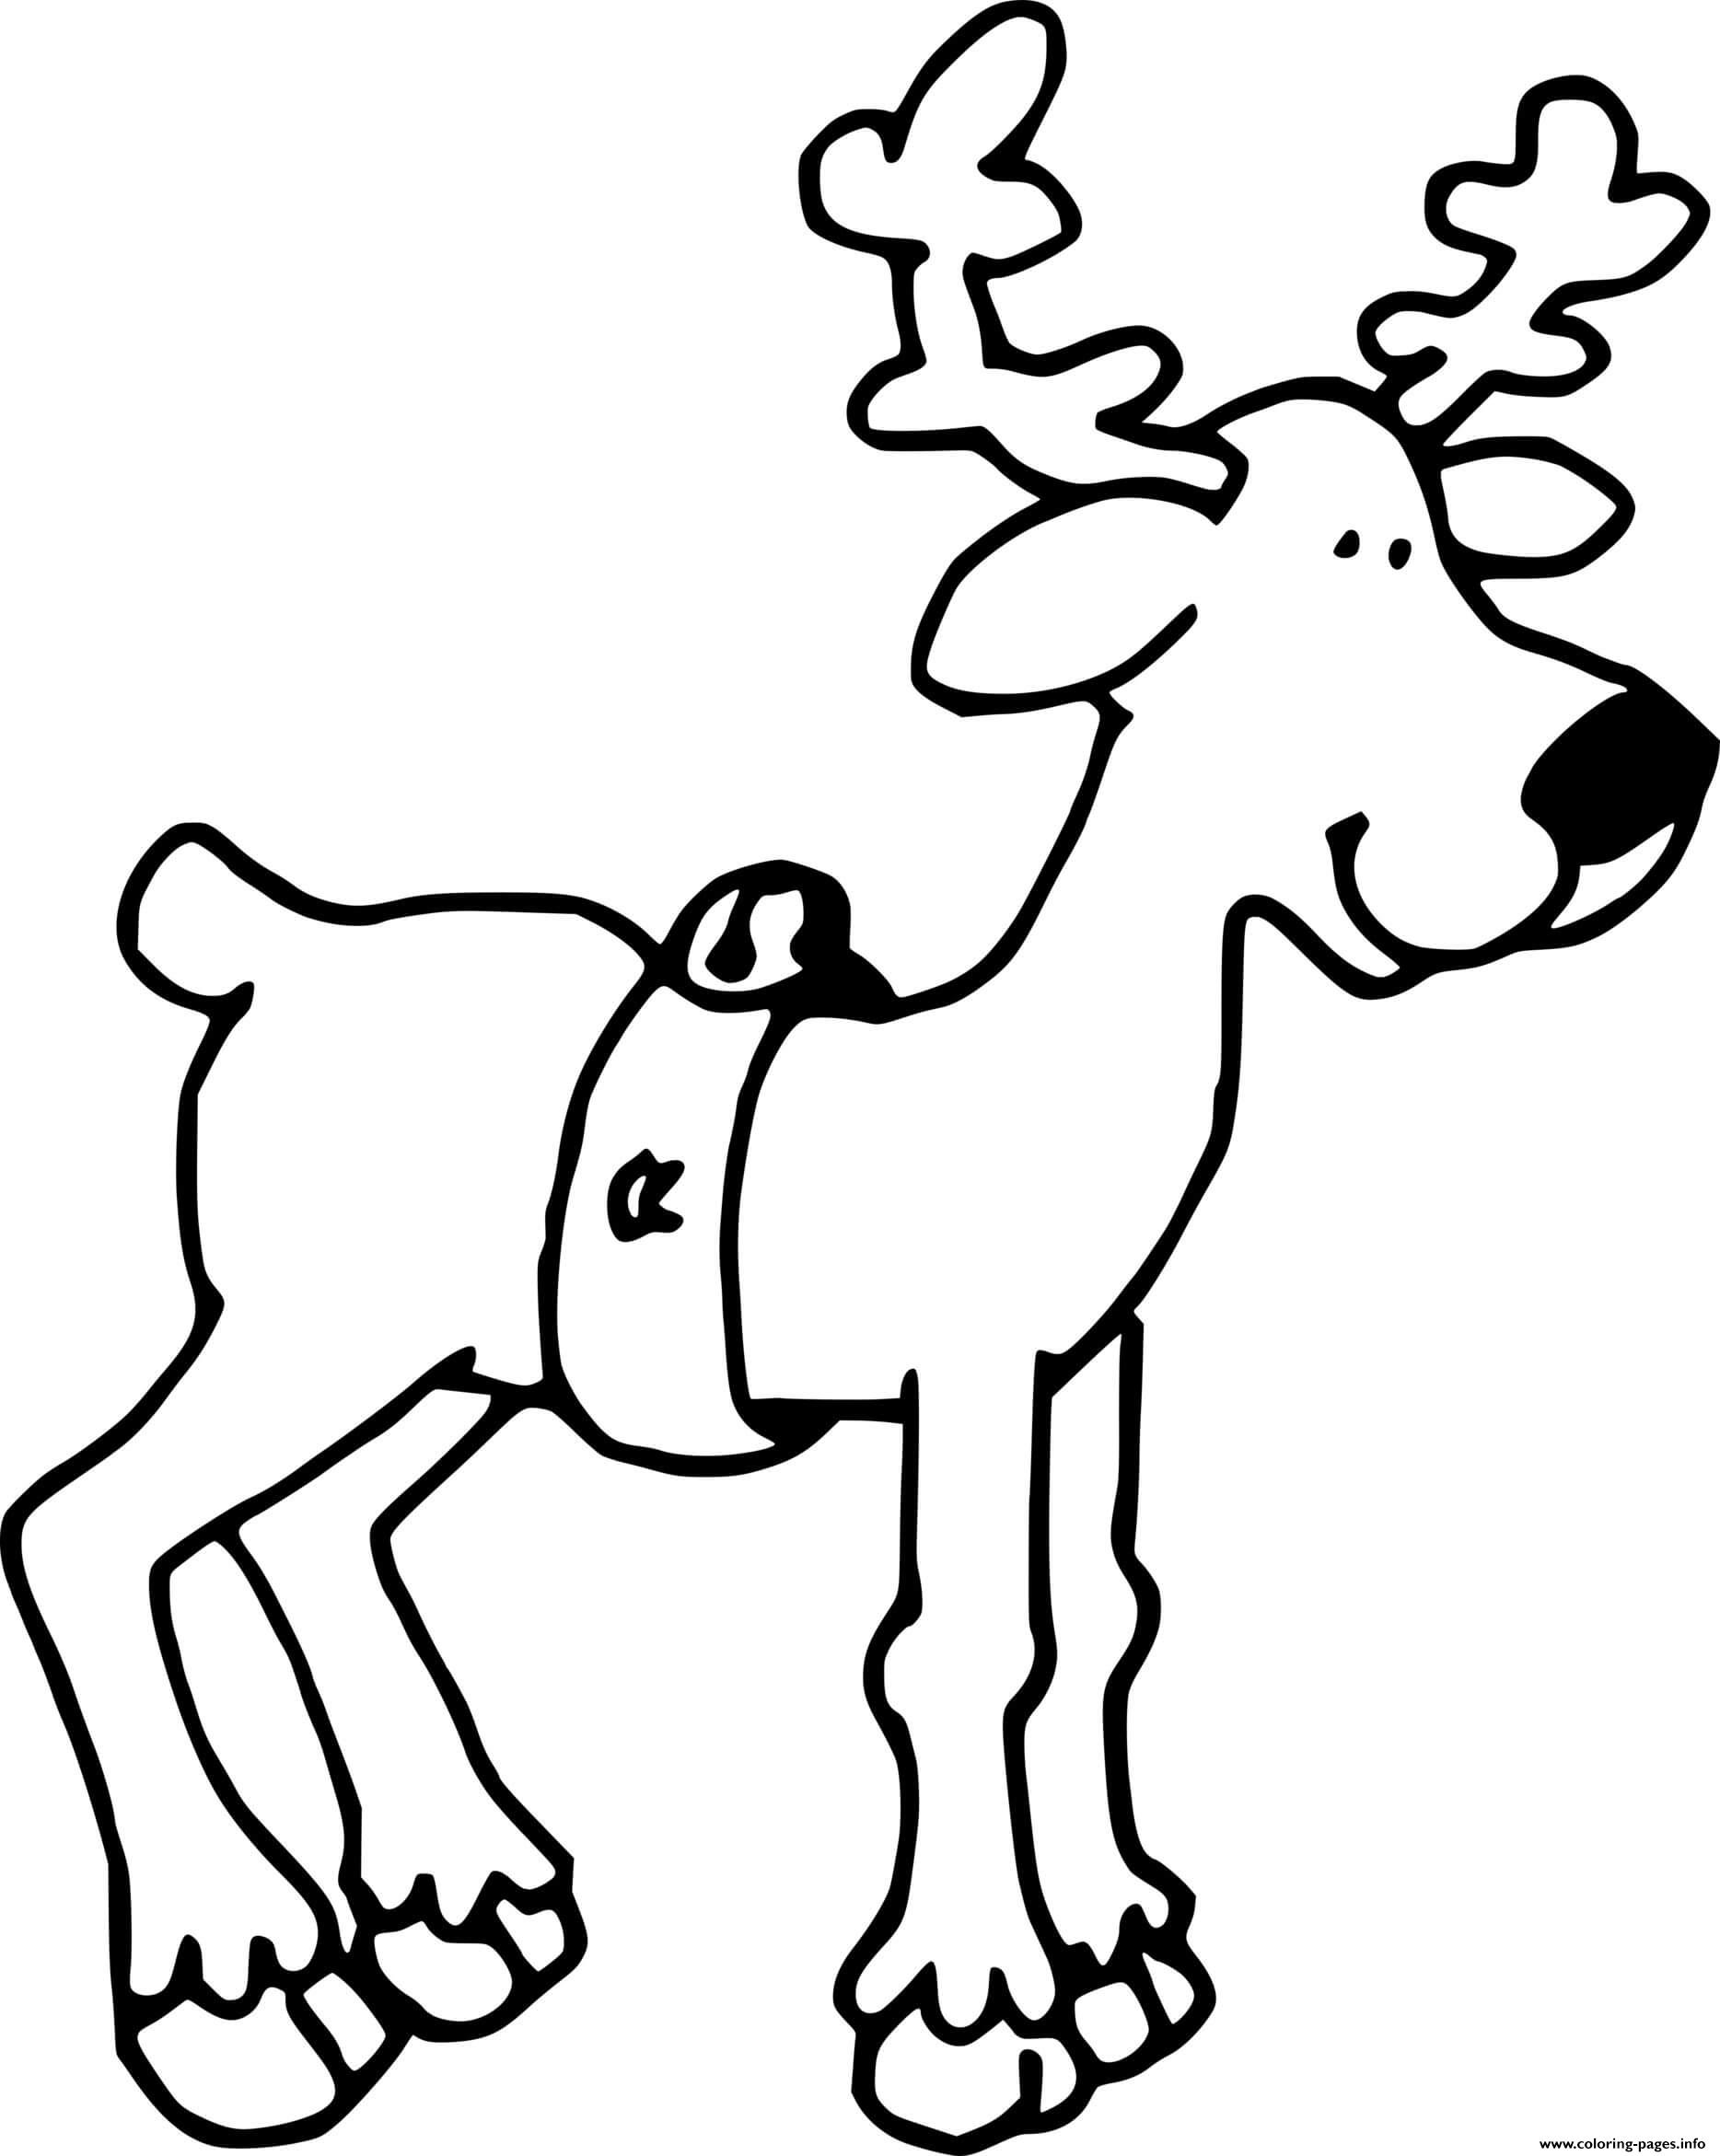 Reindeer Looks Like A Dog coloring pages